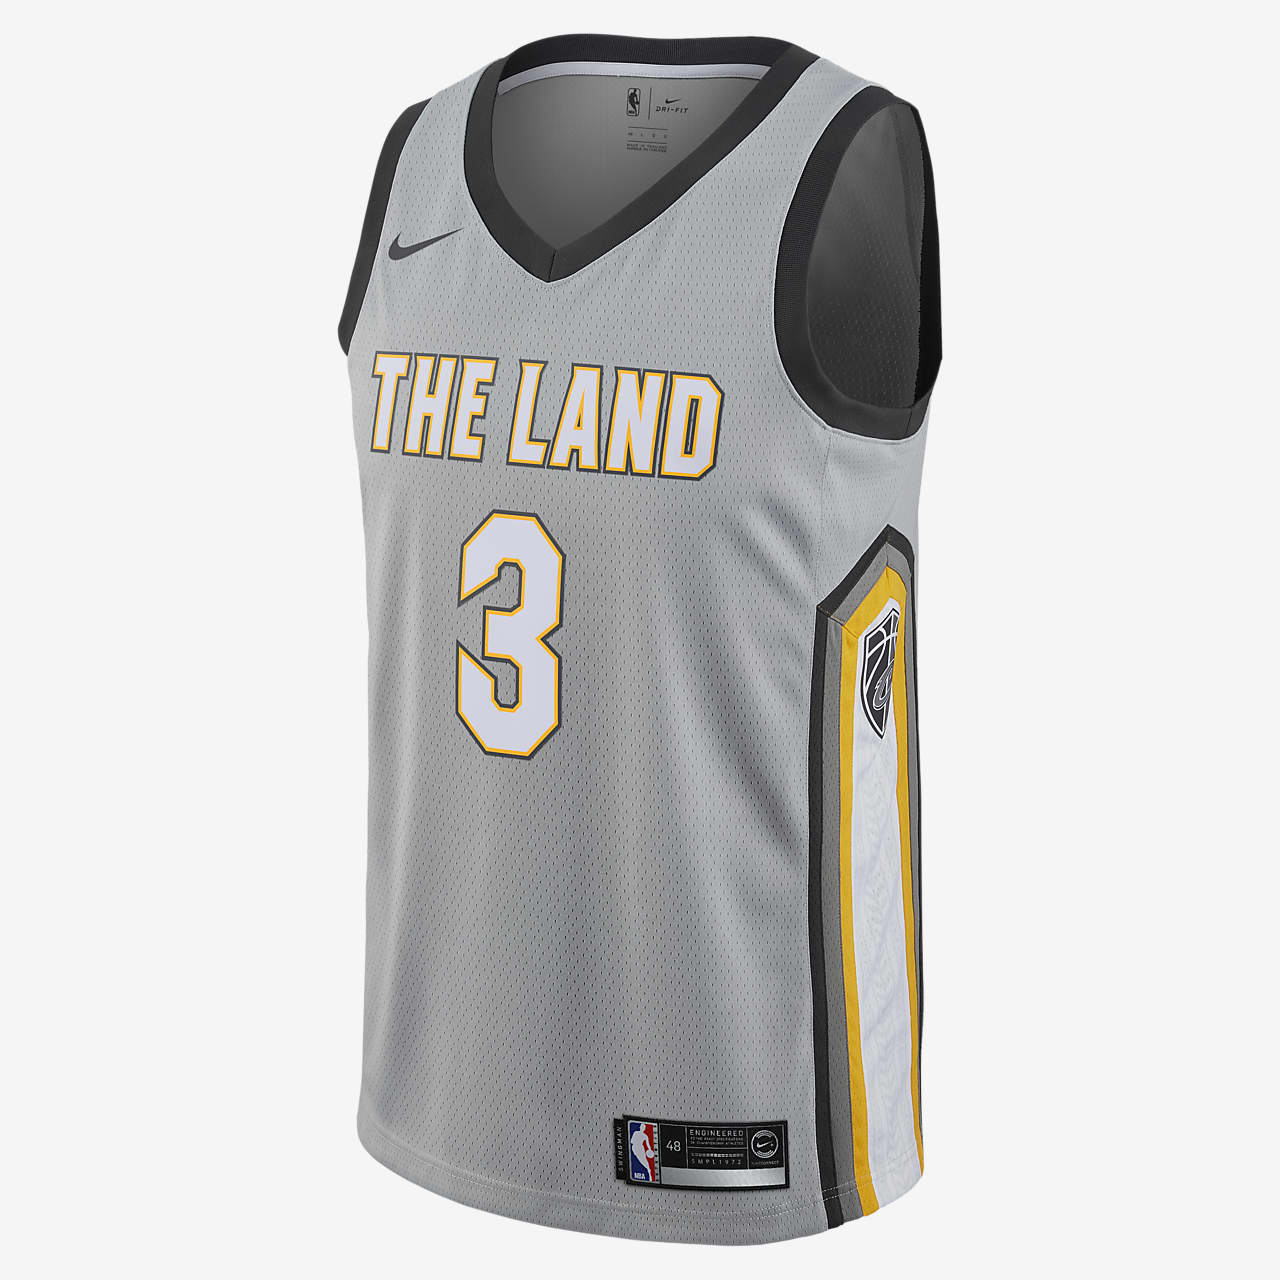 jersey cleveland cavaliers nike